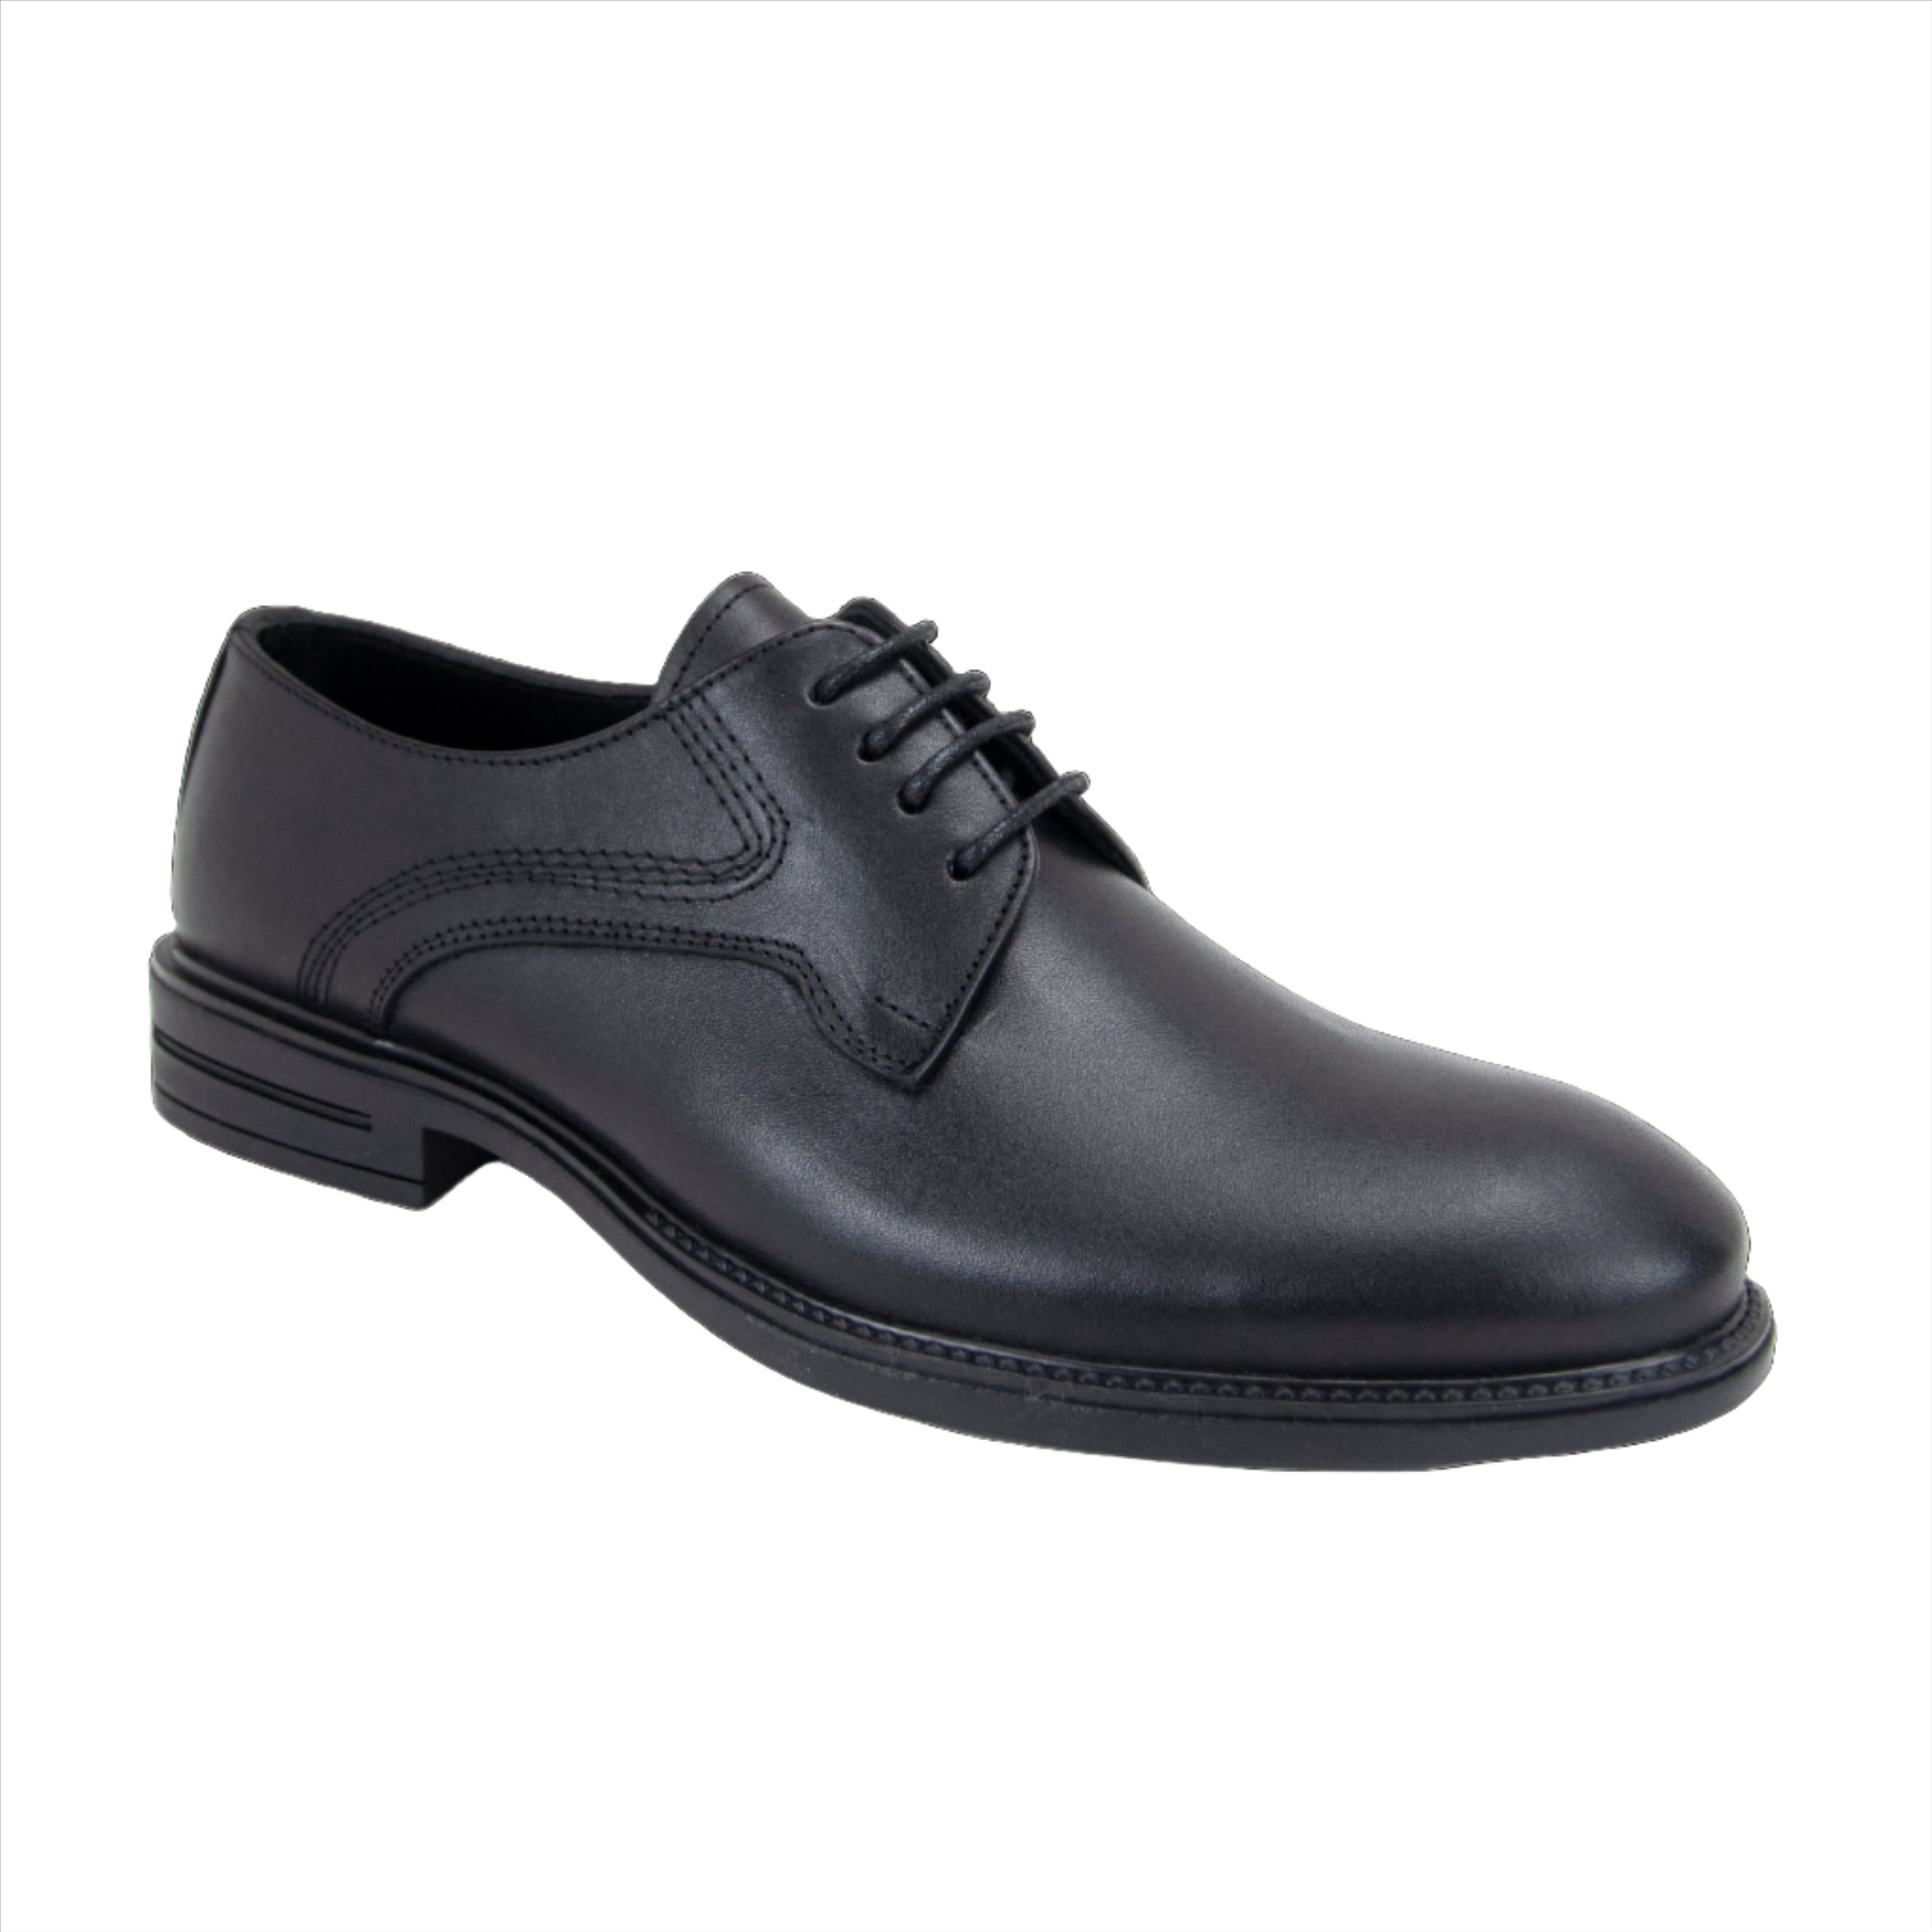 Dorano 2 - Leather Derby dress shoes (signature)